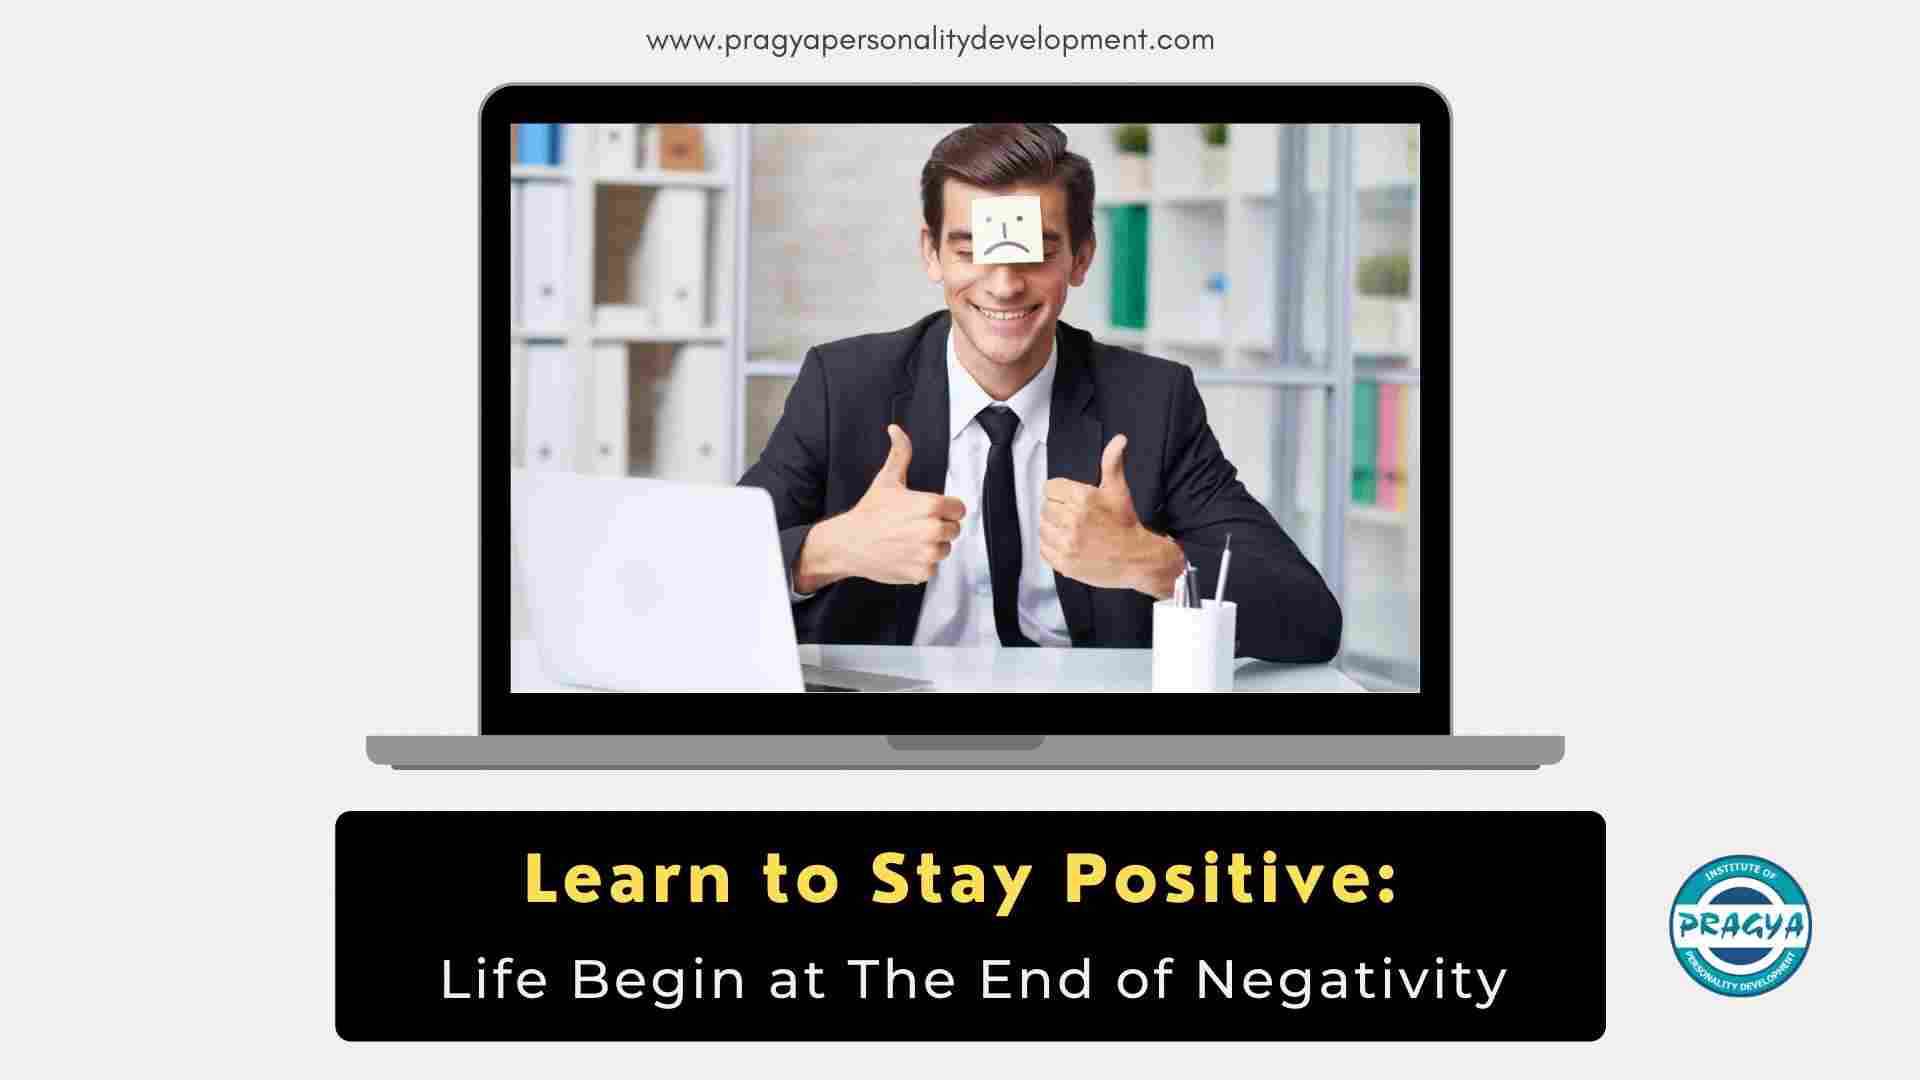 Learn to Stay Positive: Life Begin at The End of Negativity